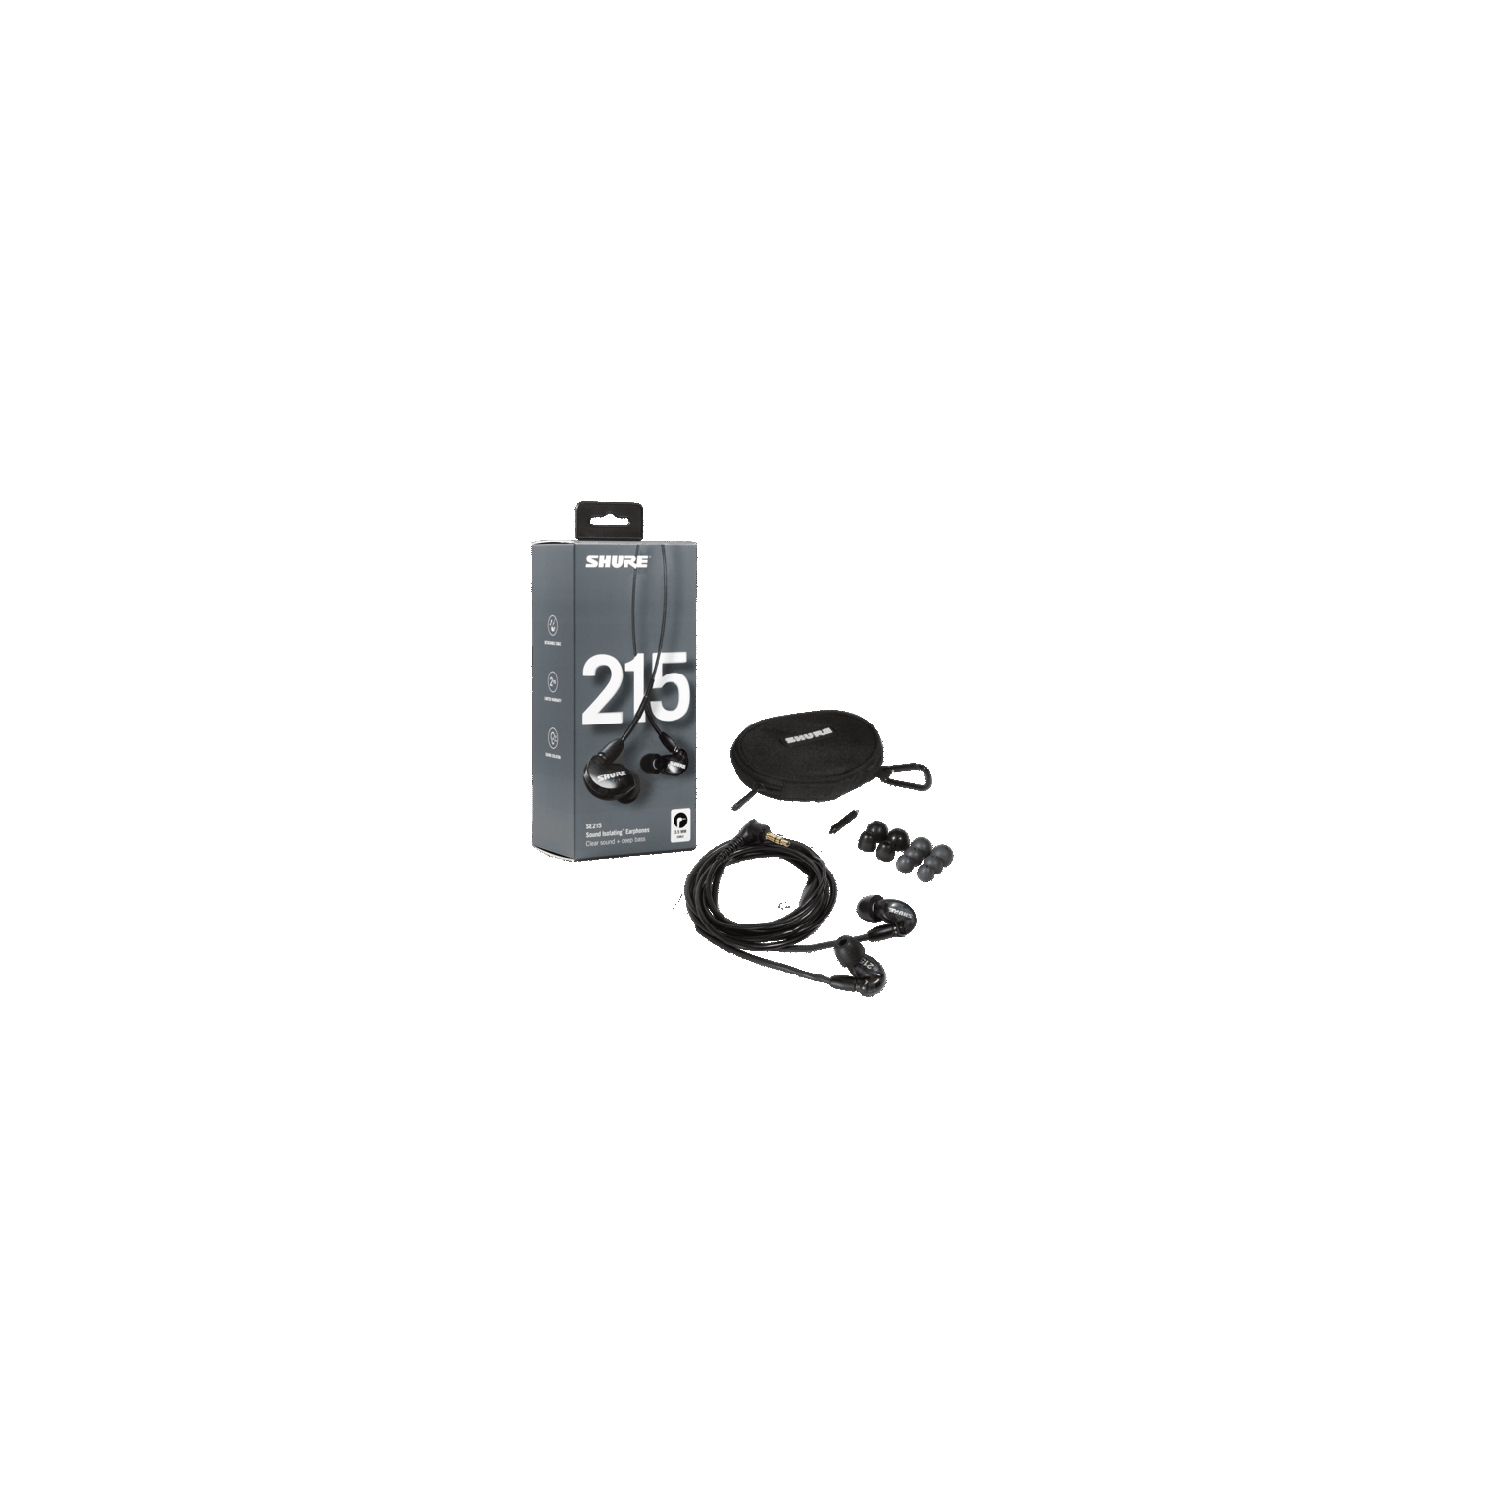 Shure SE215-K Sound Isolating Earphones with Single Dynamic